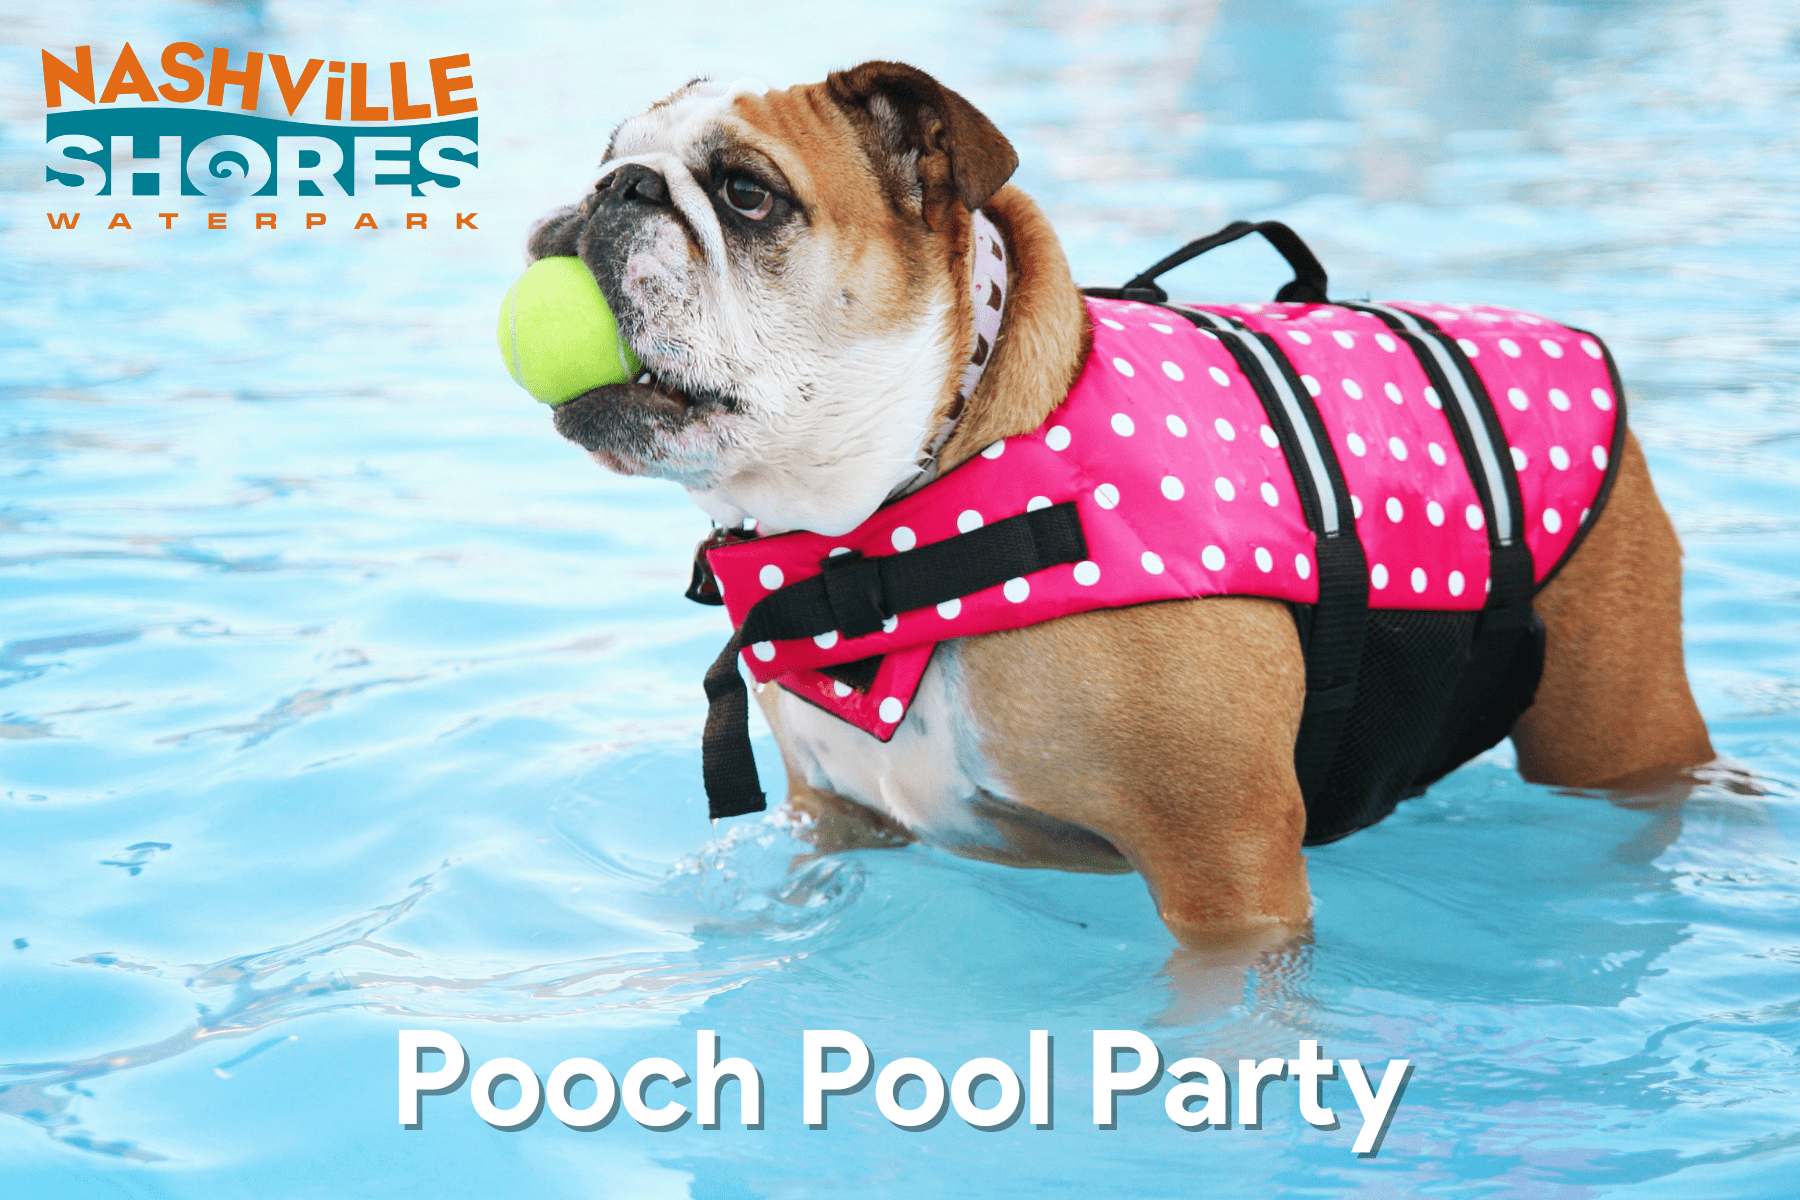 Nashville Shores Pooch Pool Party, a dog friendly event in Nashville, Tennessee.